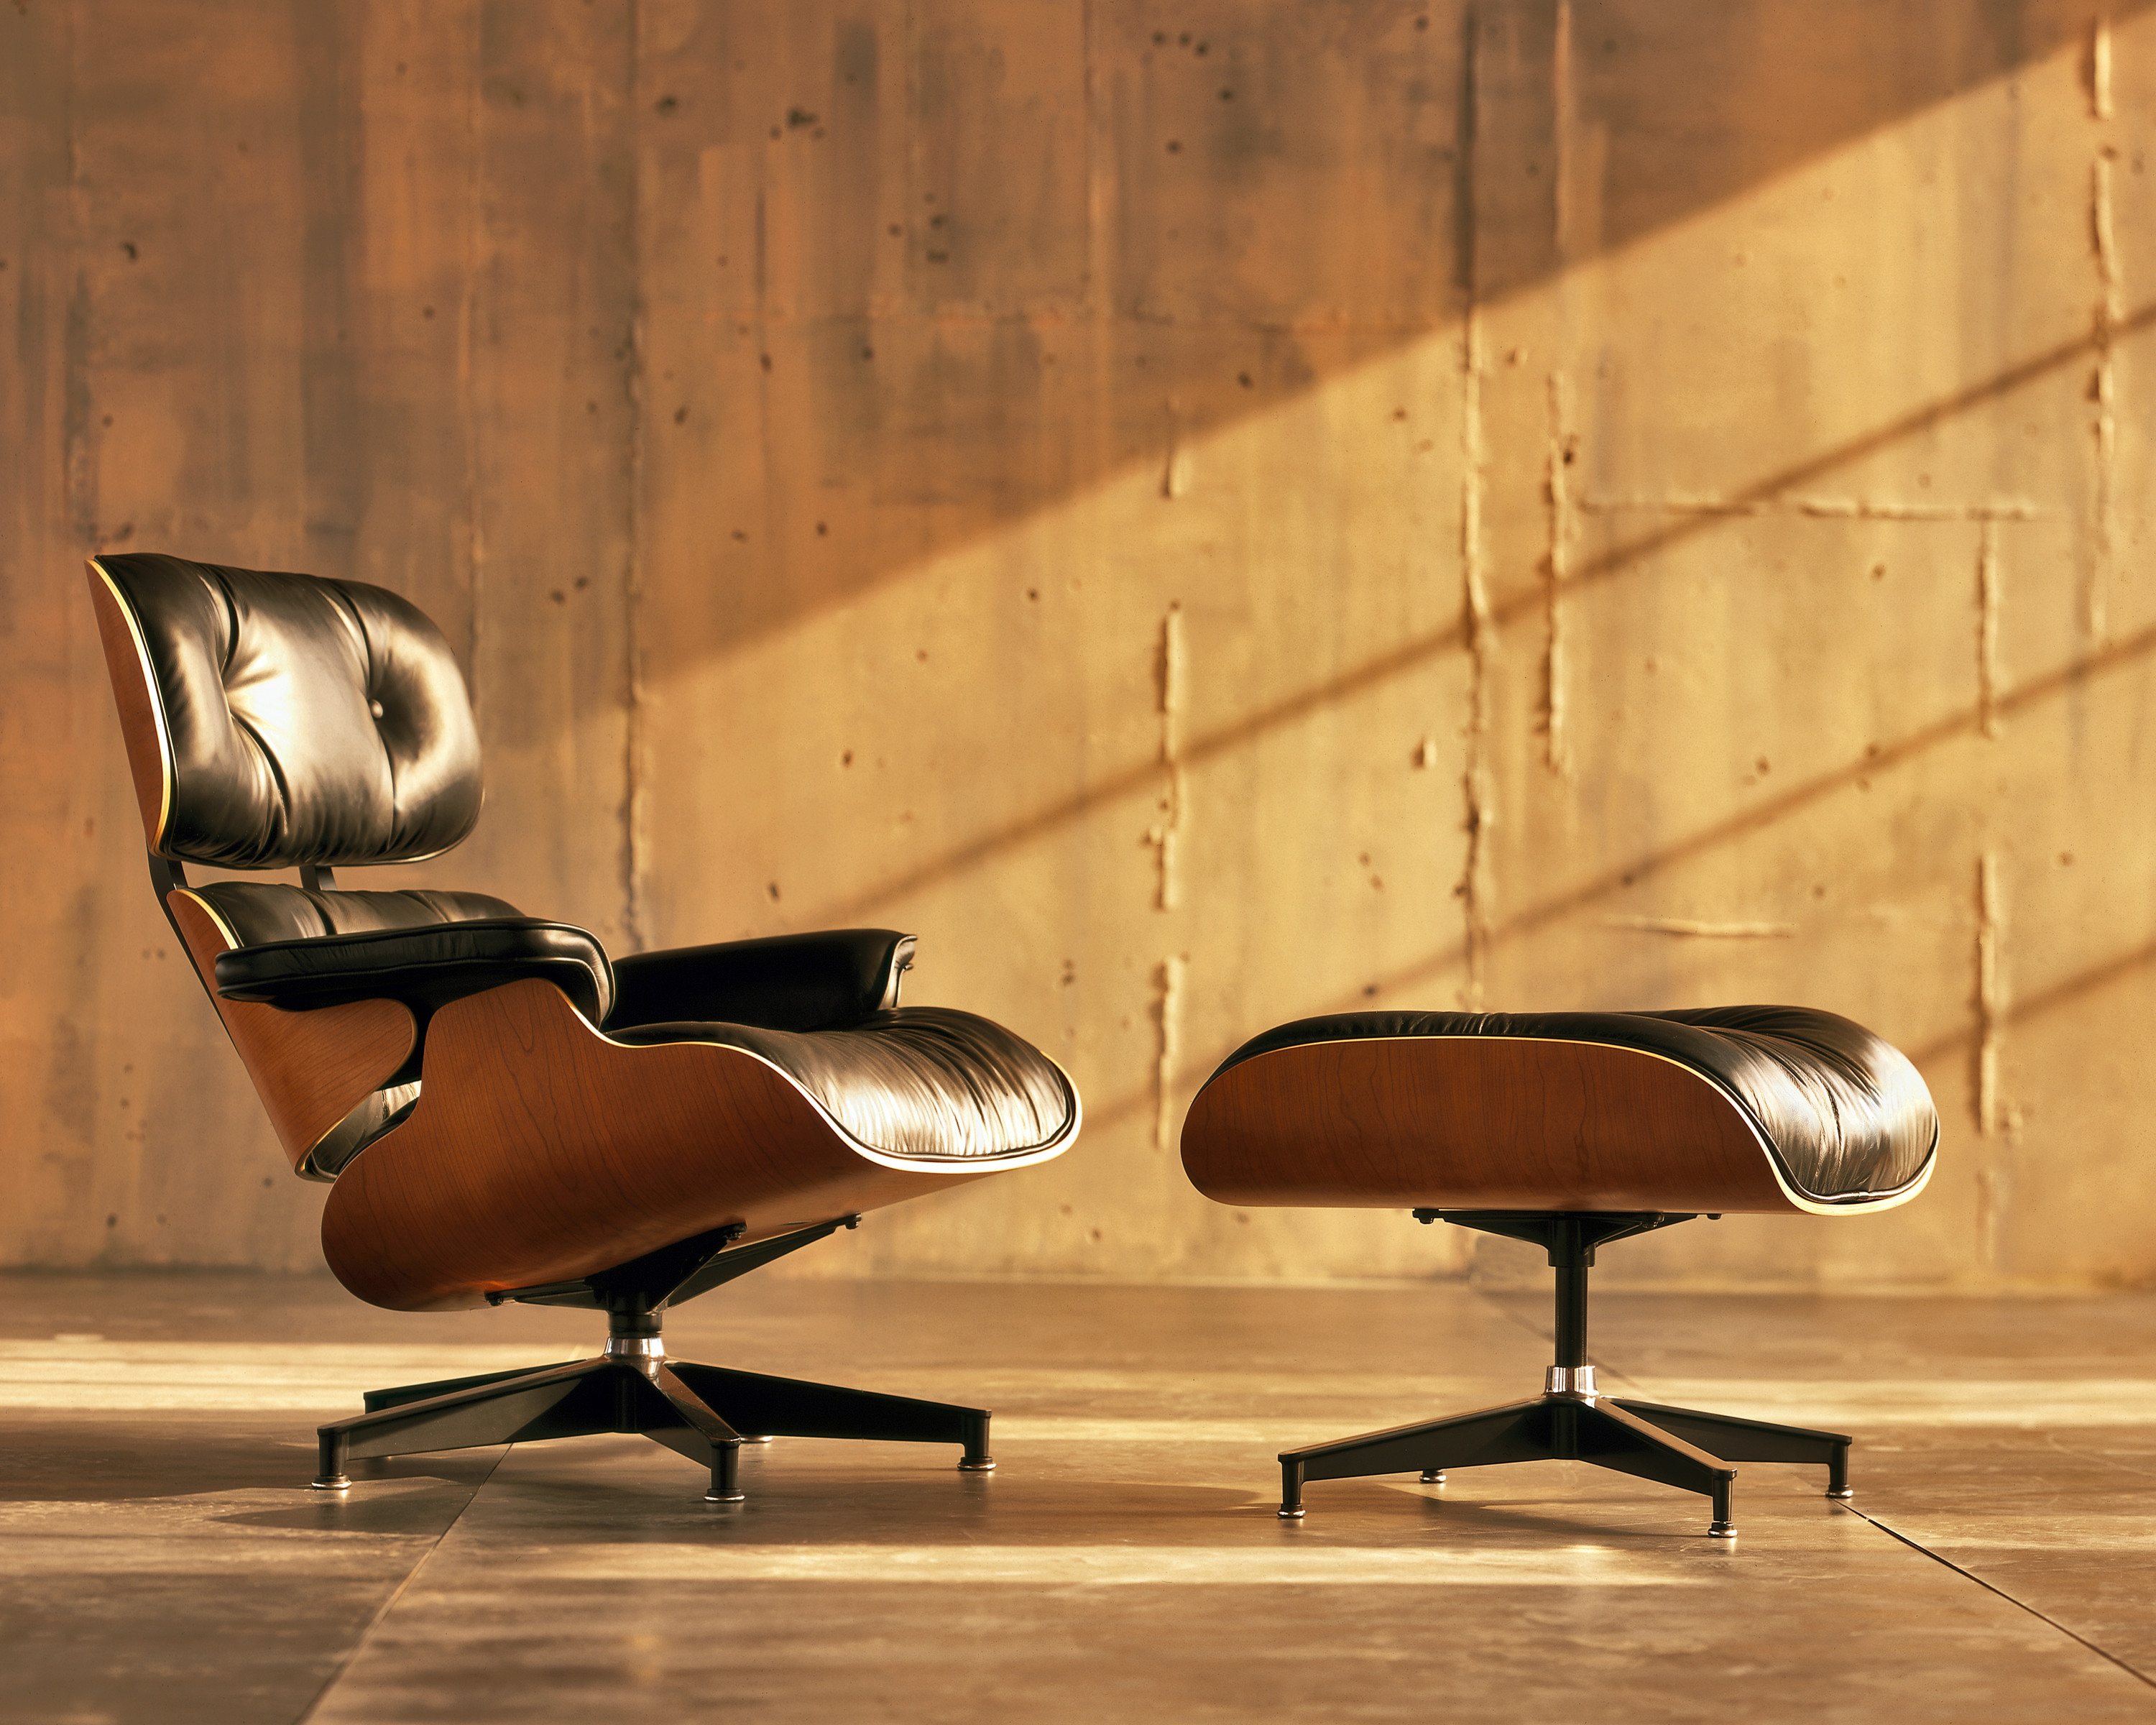 Eames Lounge Chair and Ottoman in room setting